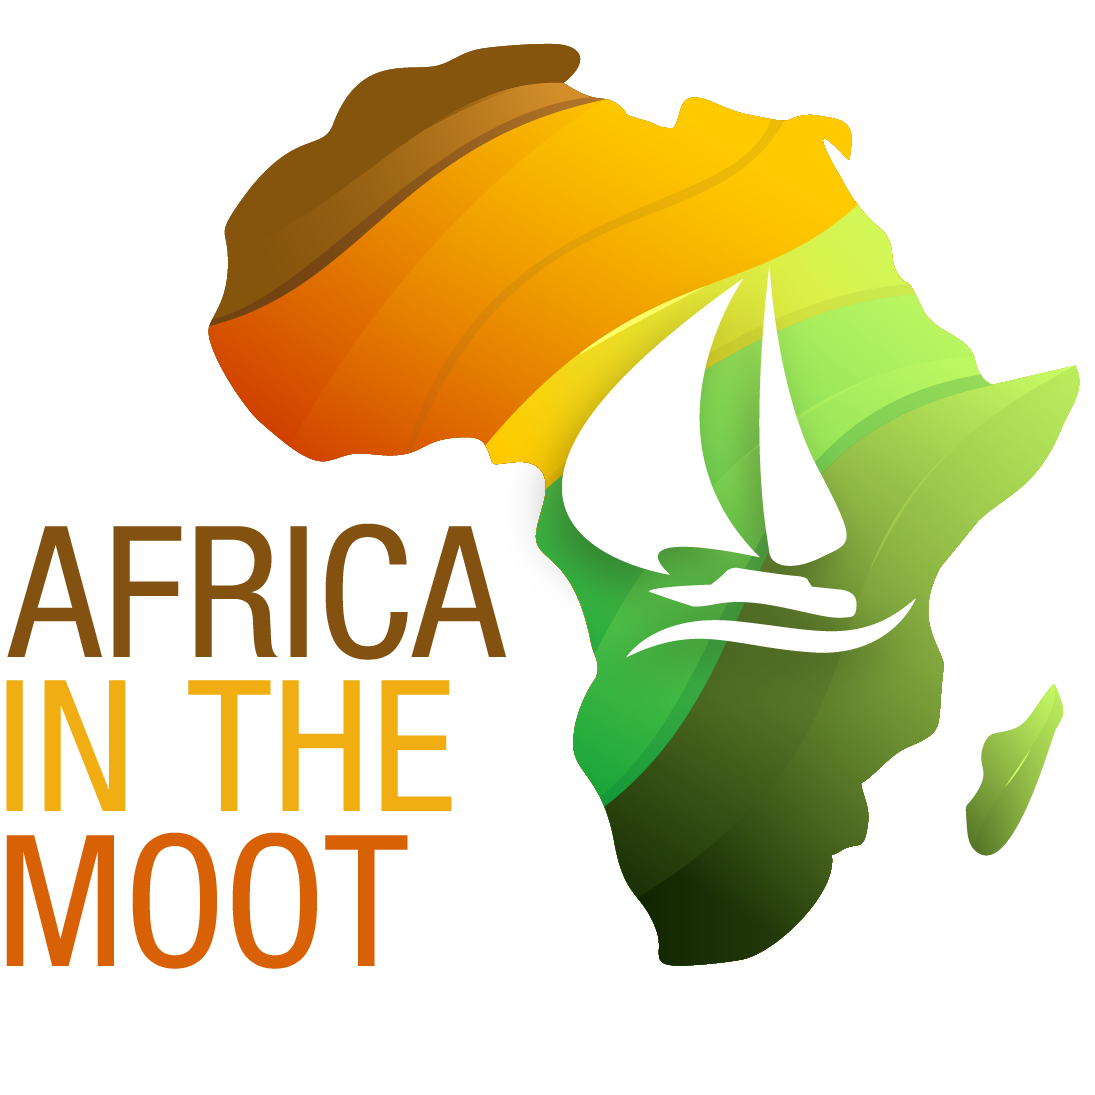 Africa in the Moot